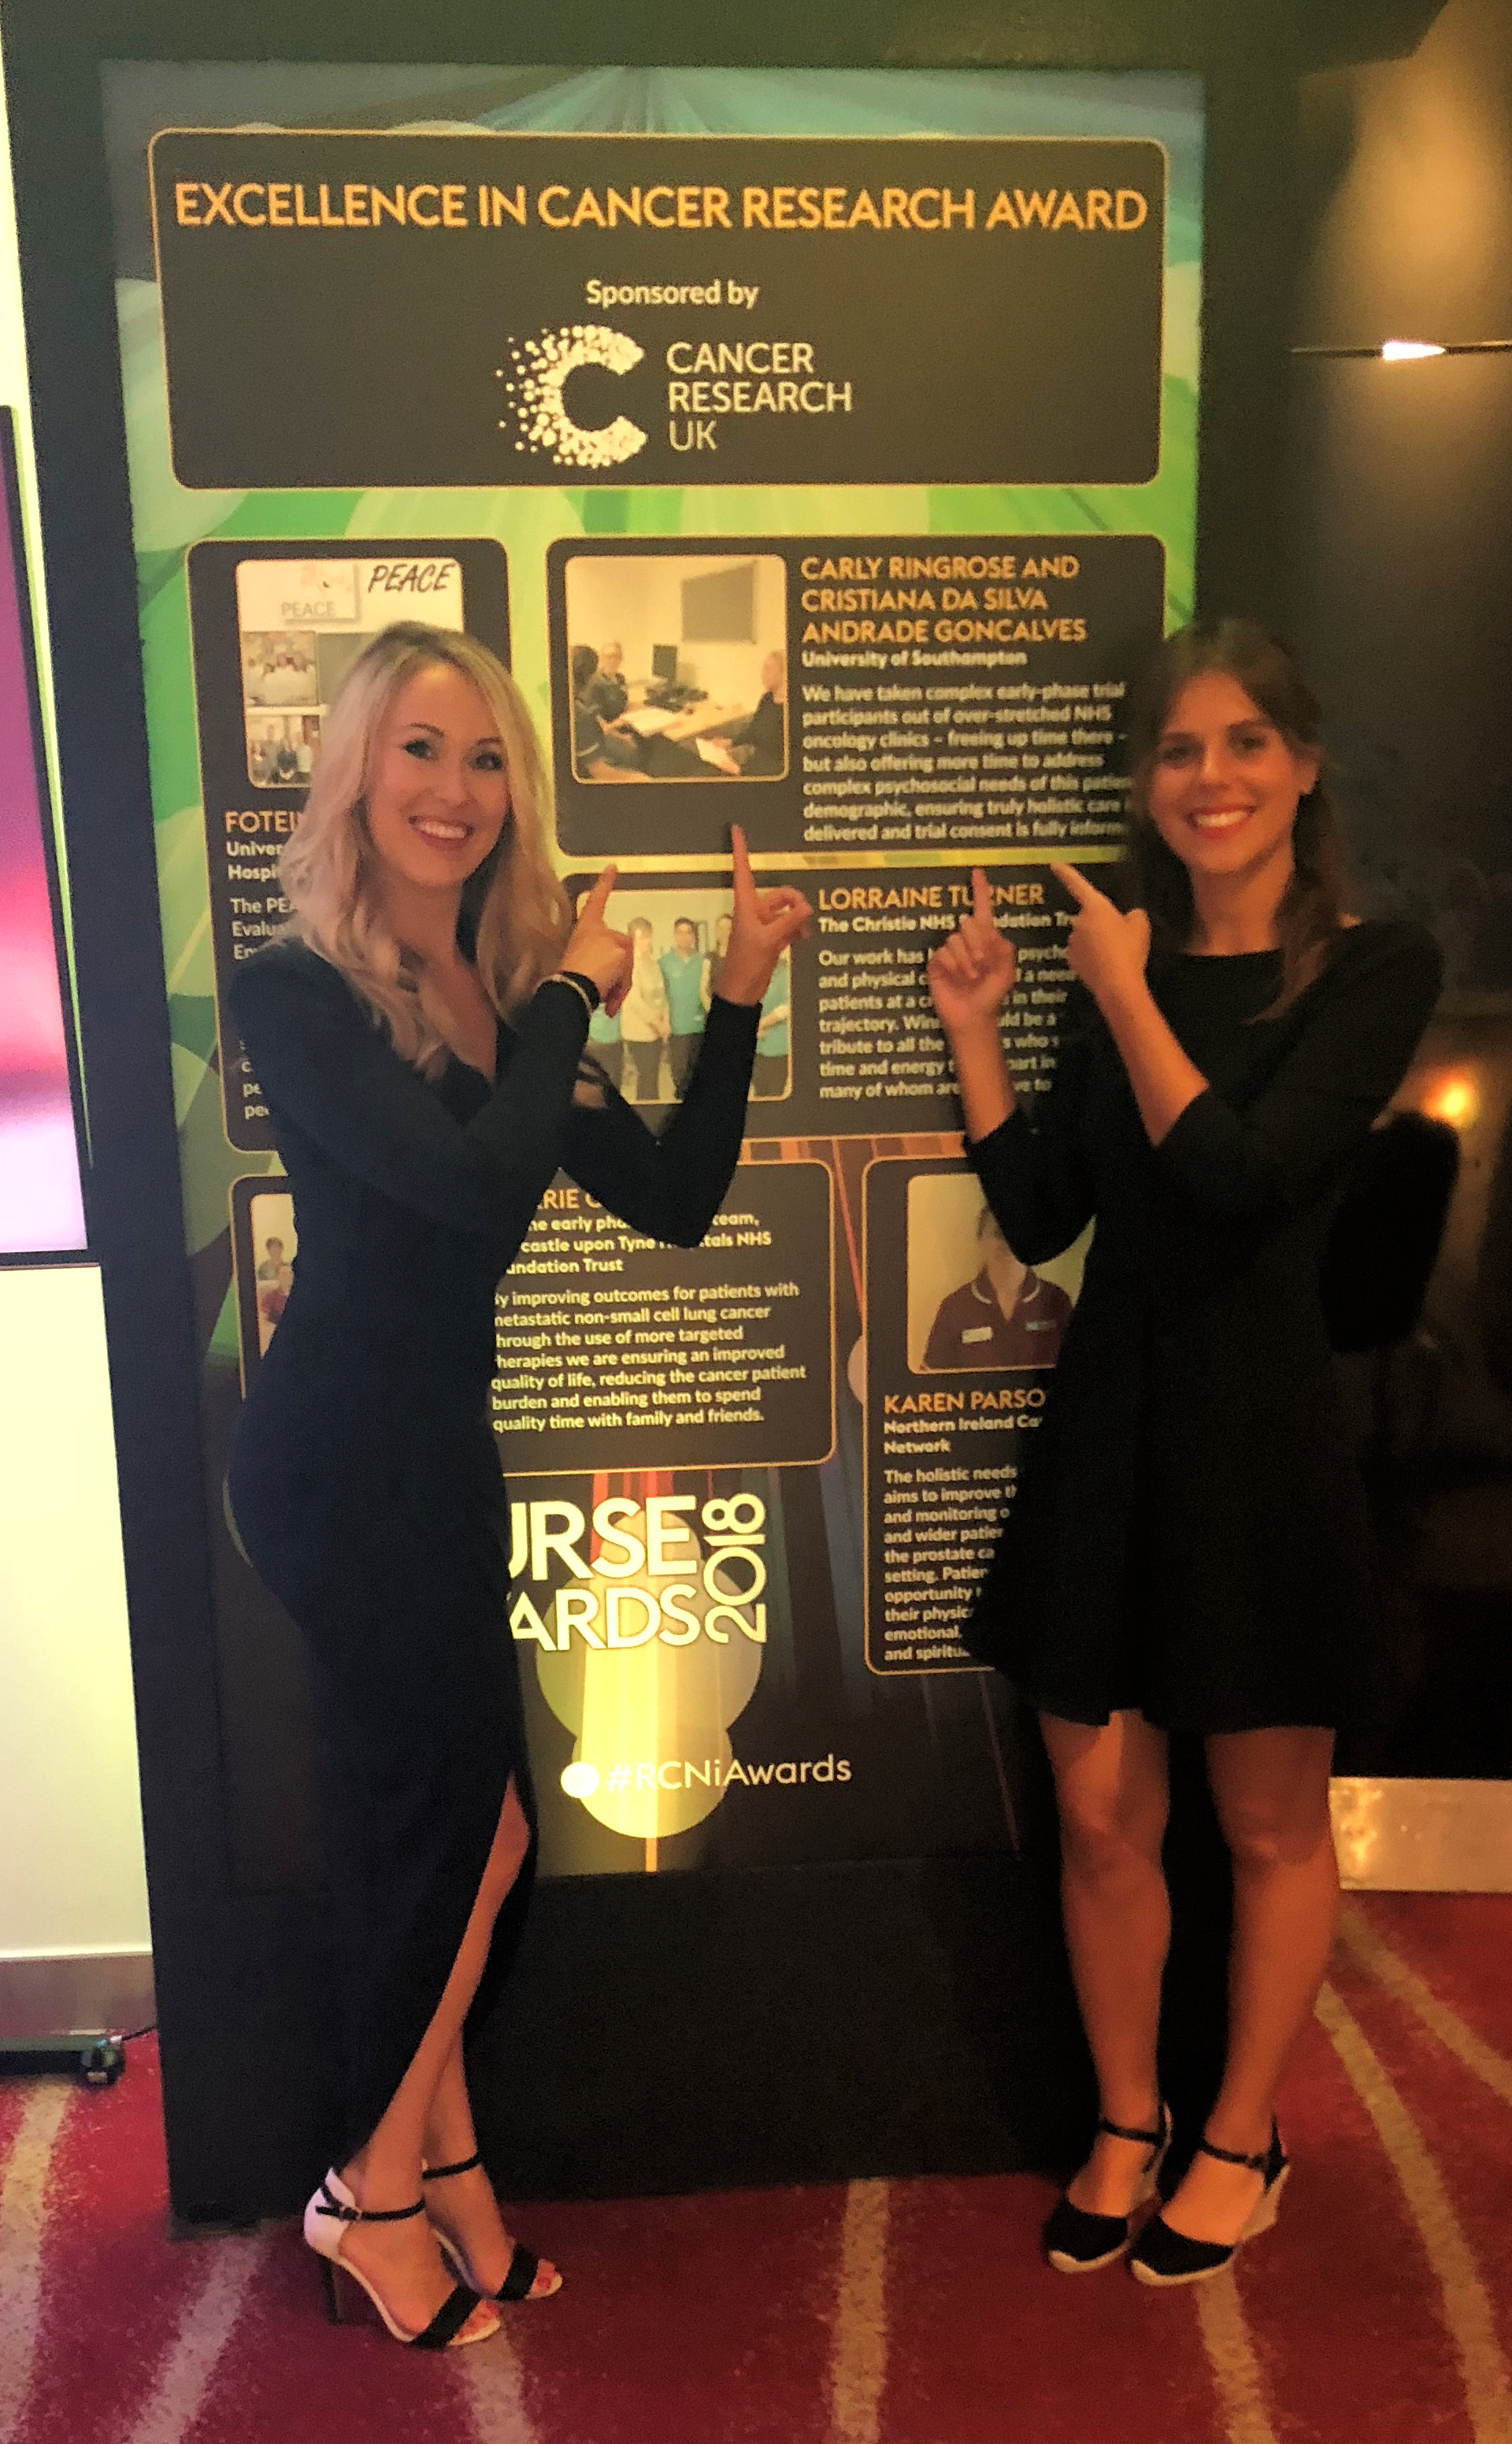 Carly Ringrose & Cristiana Goncalves - Excellence in Cancer Research Awards